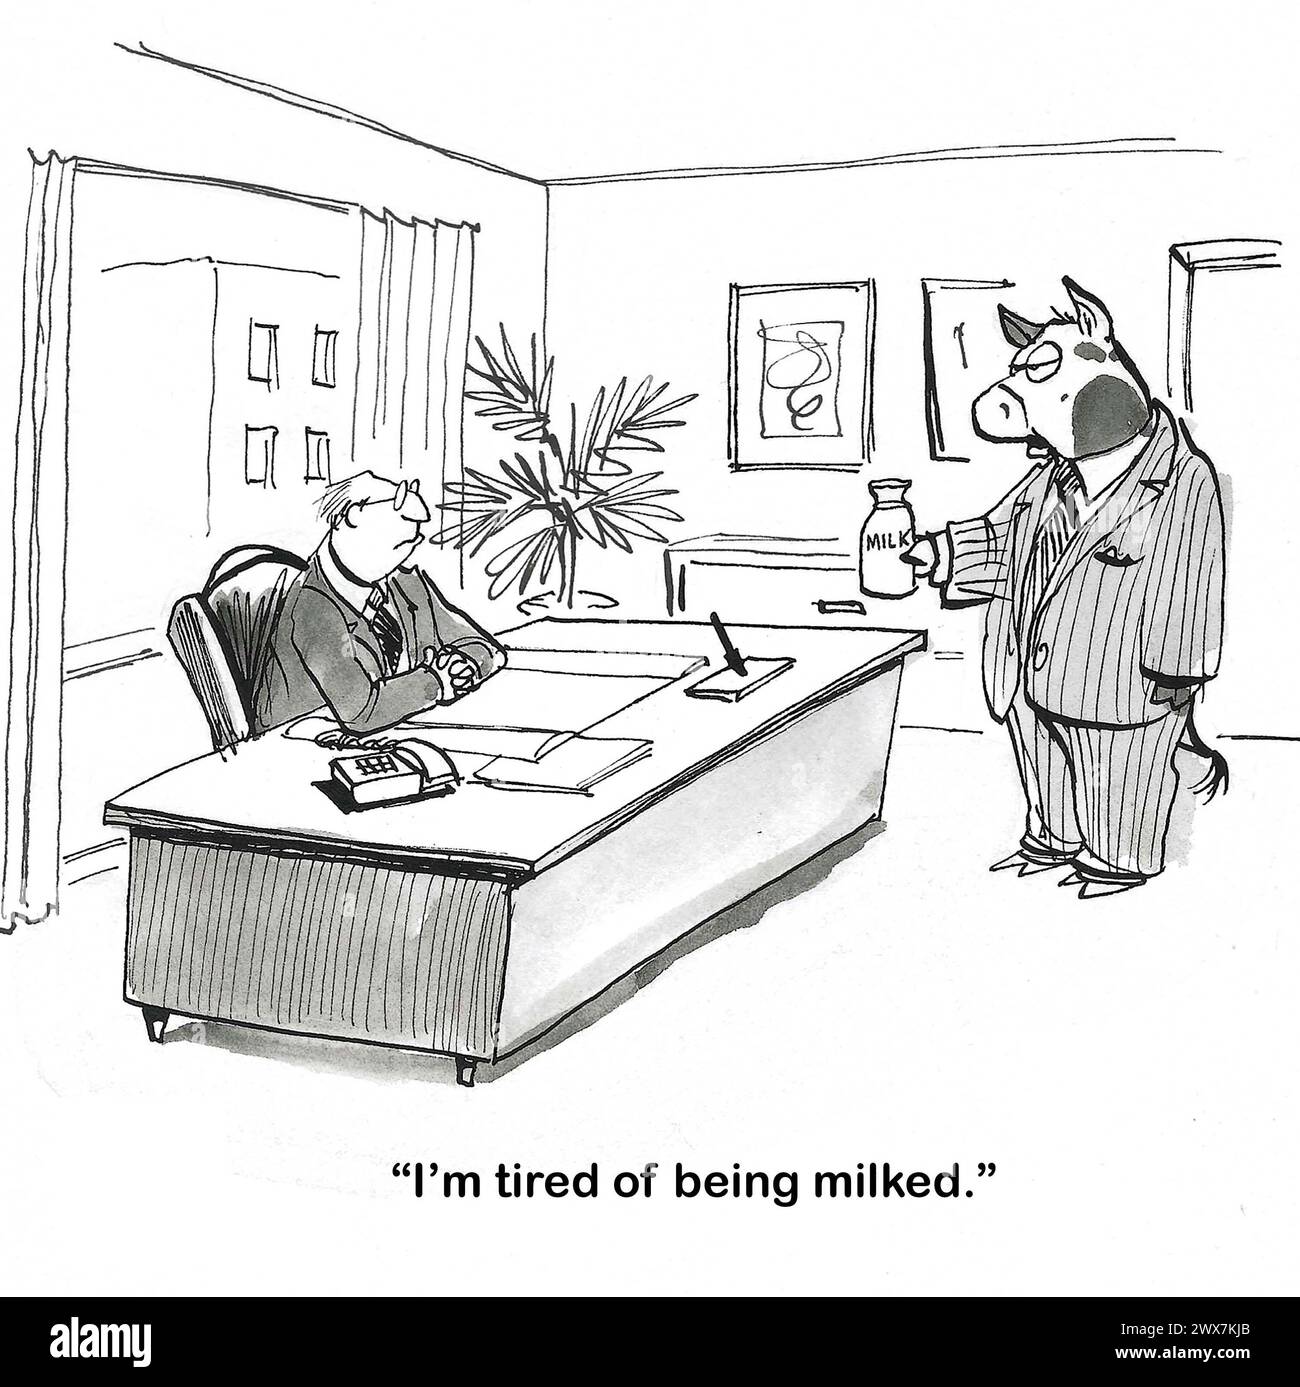 BW cartoon of a cow manager telling its human boss it is tired of being milked. Stock Photo